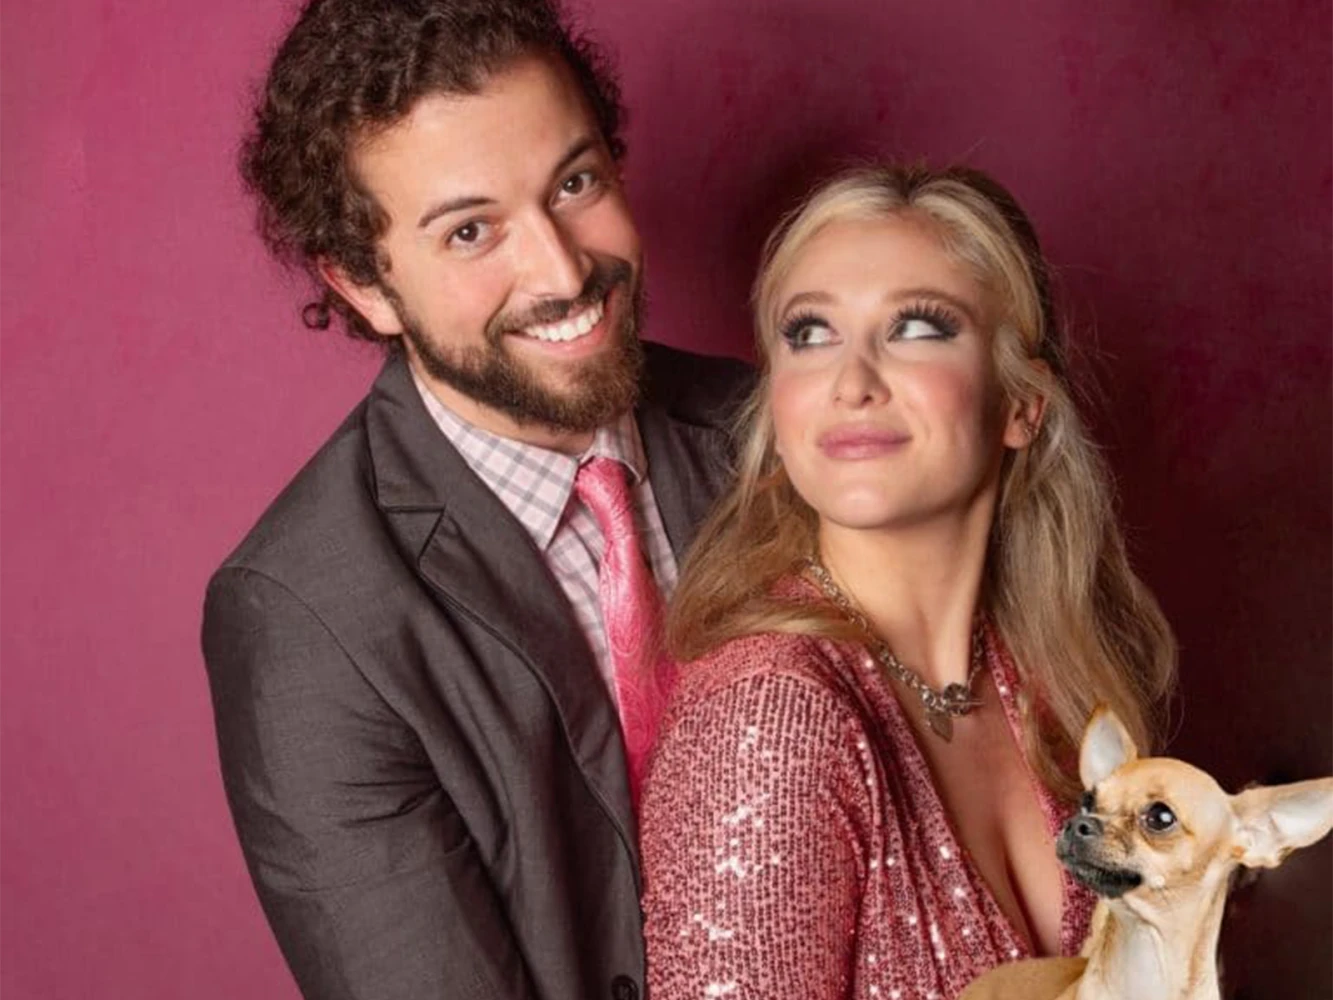 Legally Blonde: The Musical: What to expect - 2